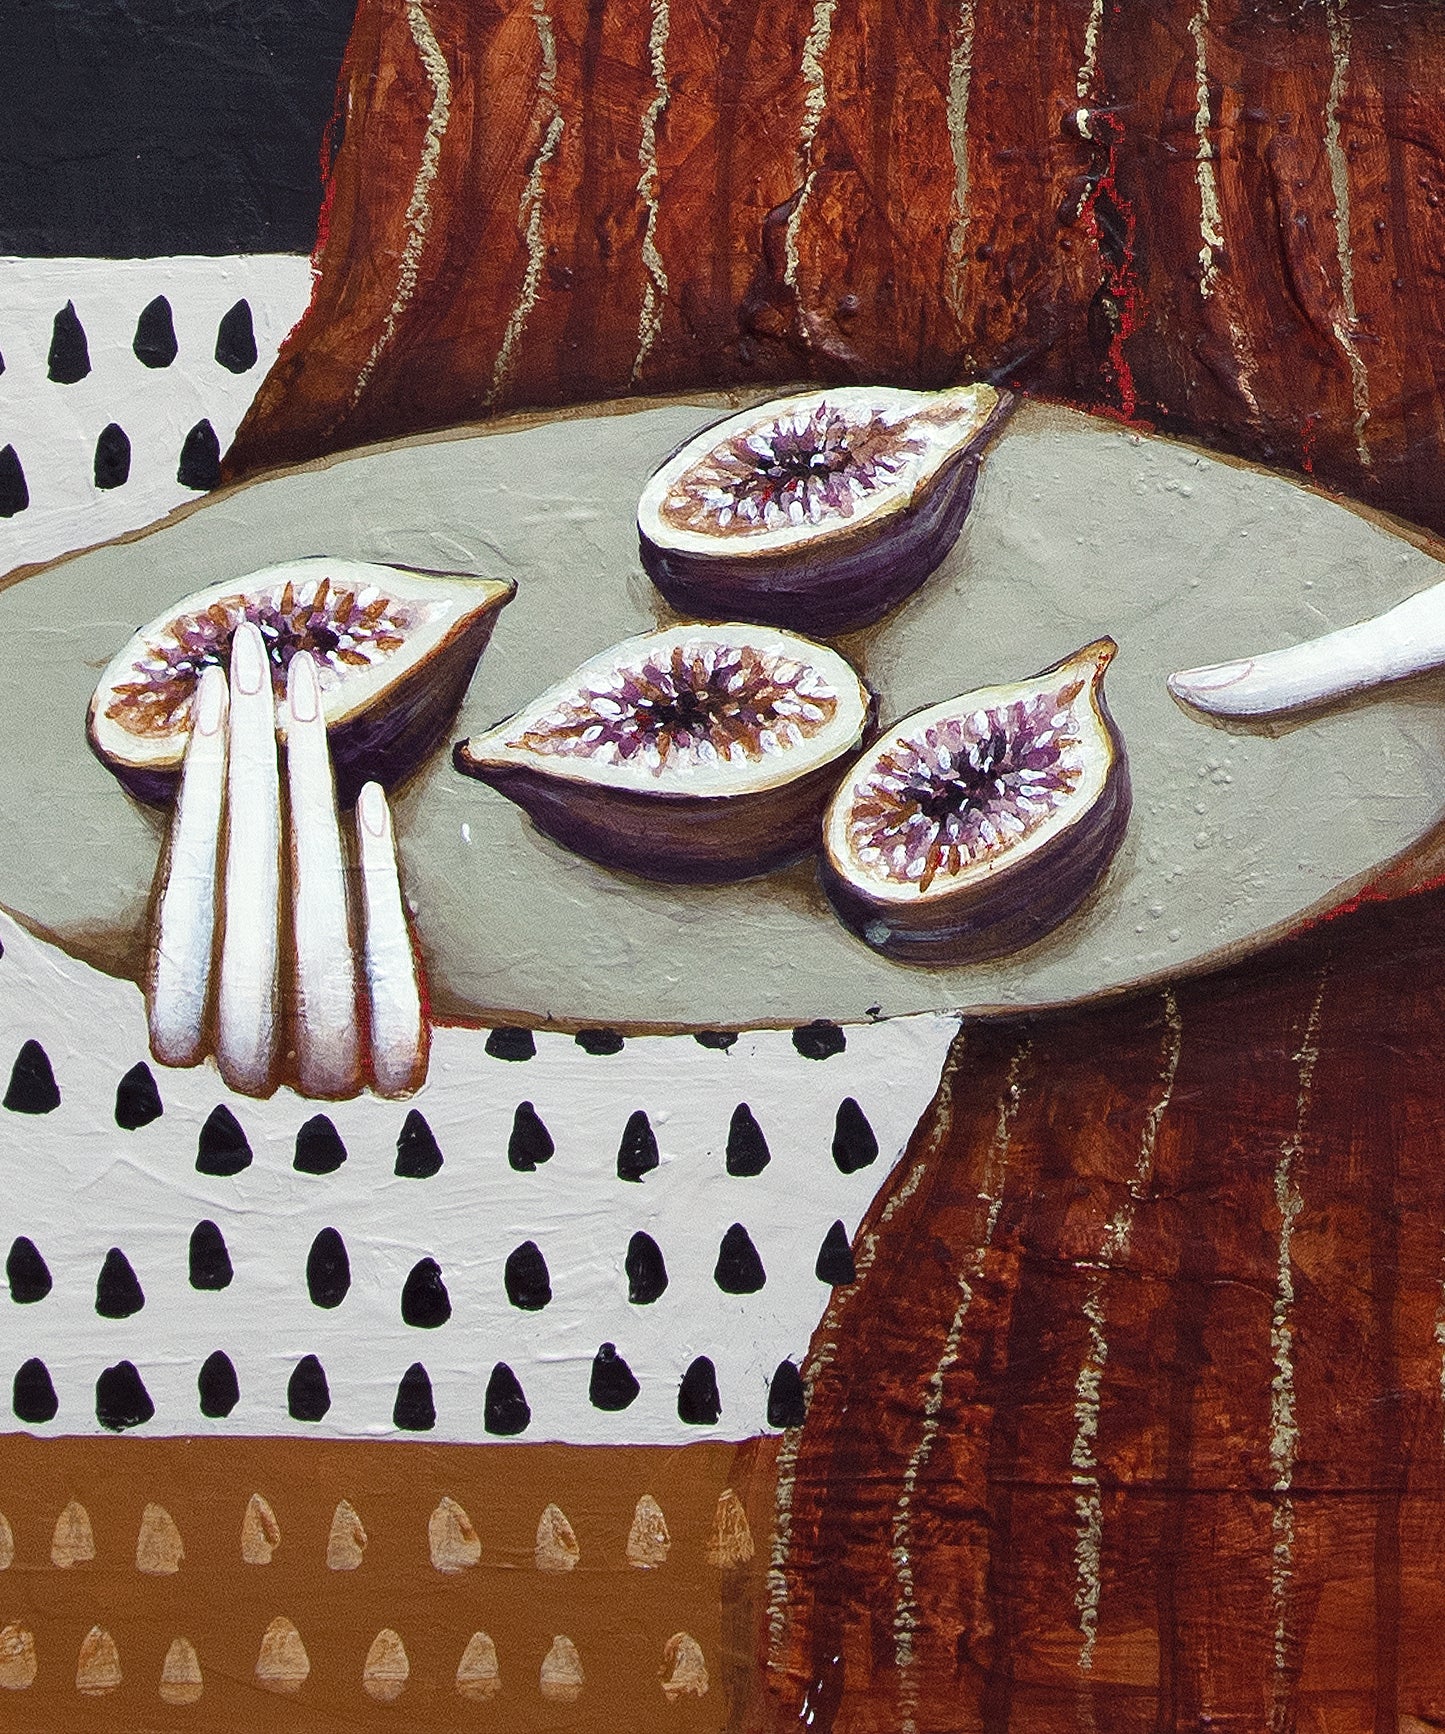 PALMS & FIGS - SOLD TO FINLAND